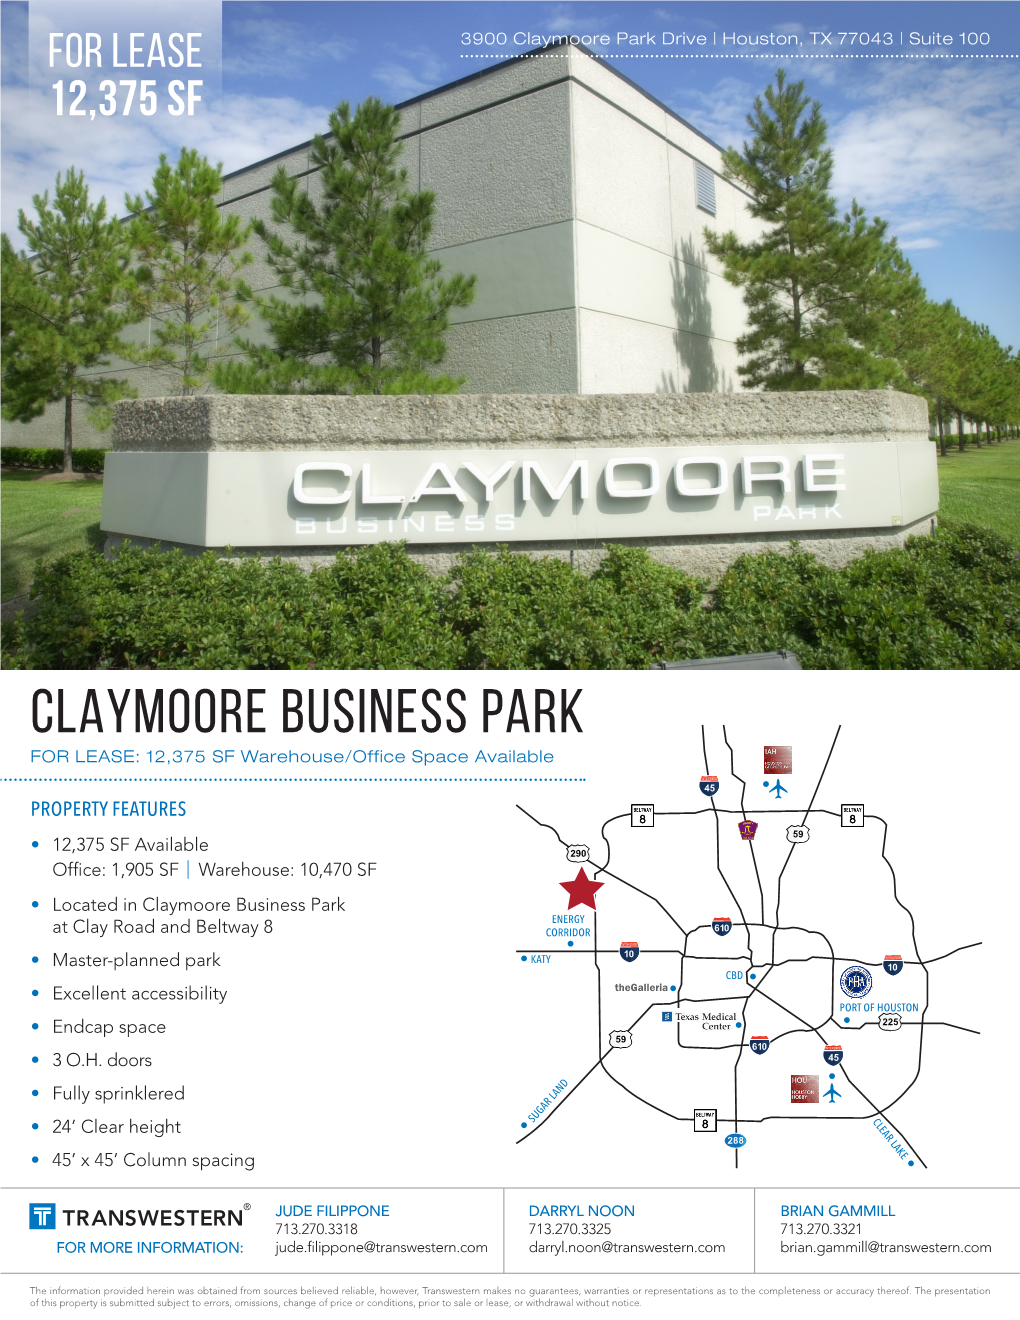 CLAYMOORE BUSINESS PARK for LEASE: 12,375 SF Warehouse/Office Space Available